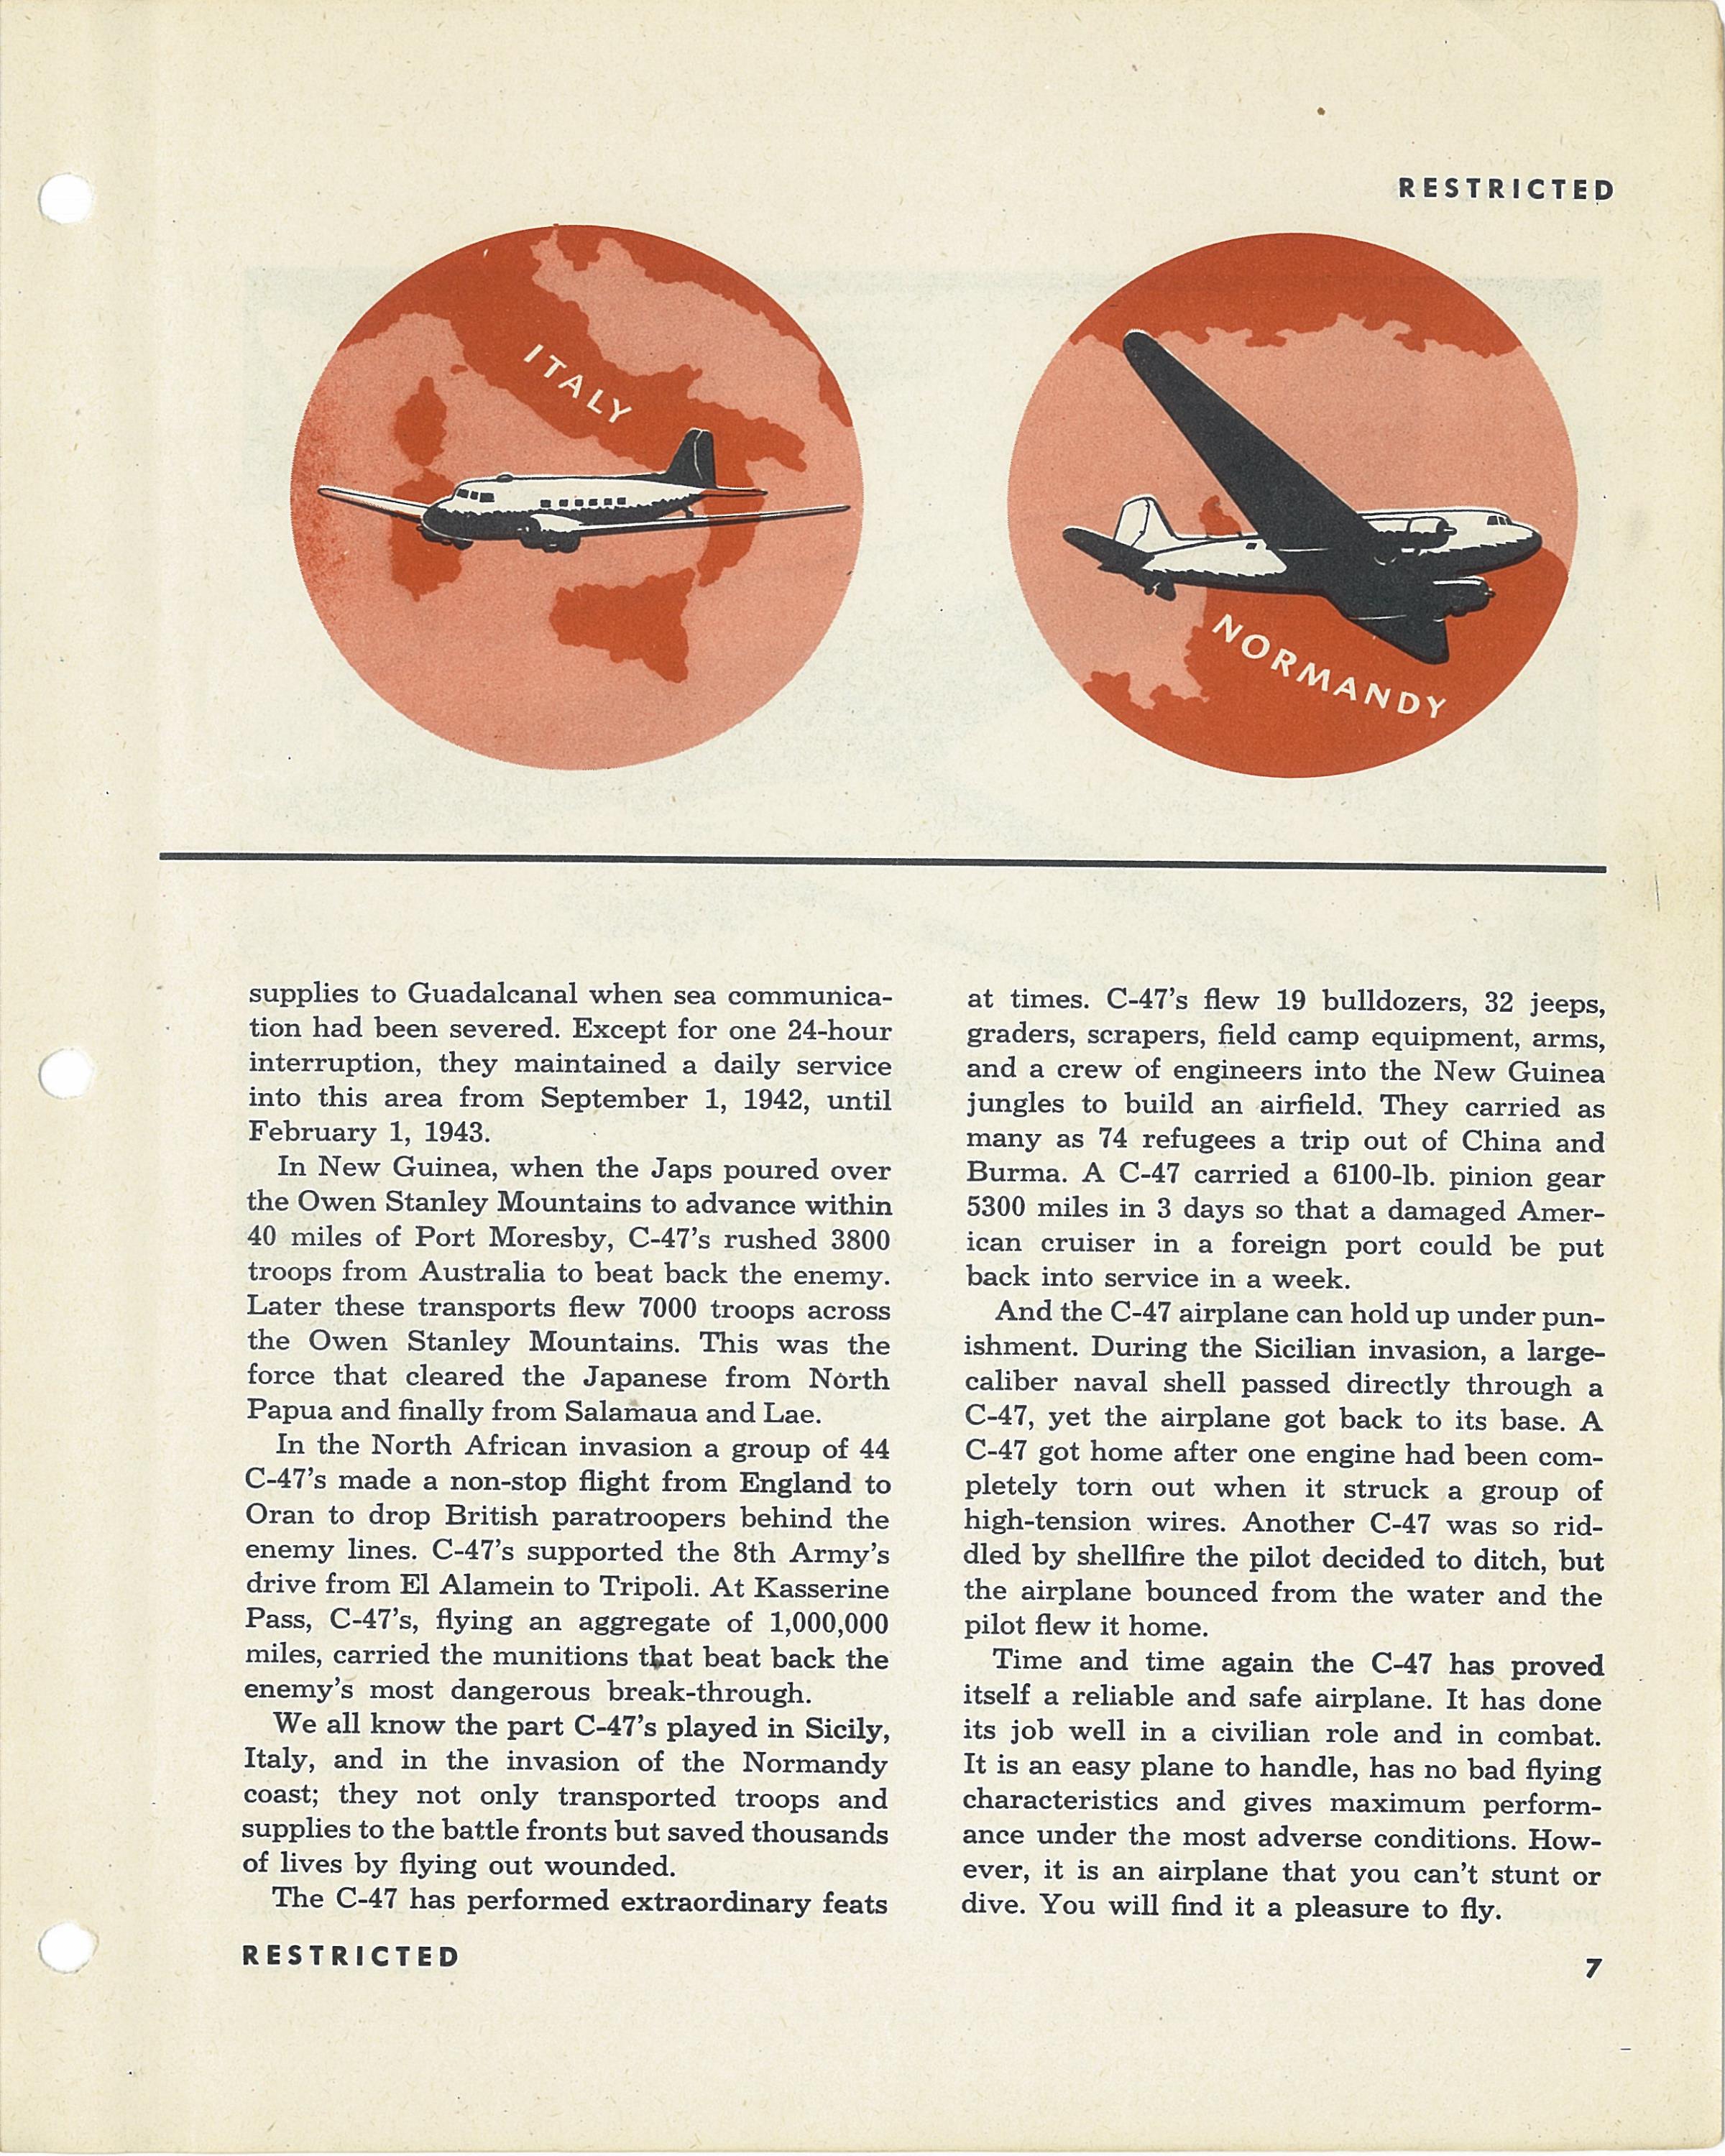 Sample page 9 from AirCorps Library document: Pilot Training Manual for the C-47 Skytrain